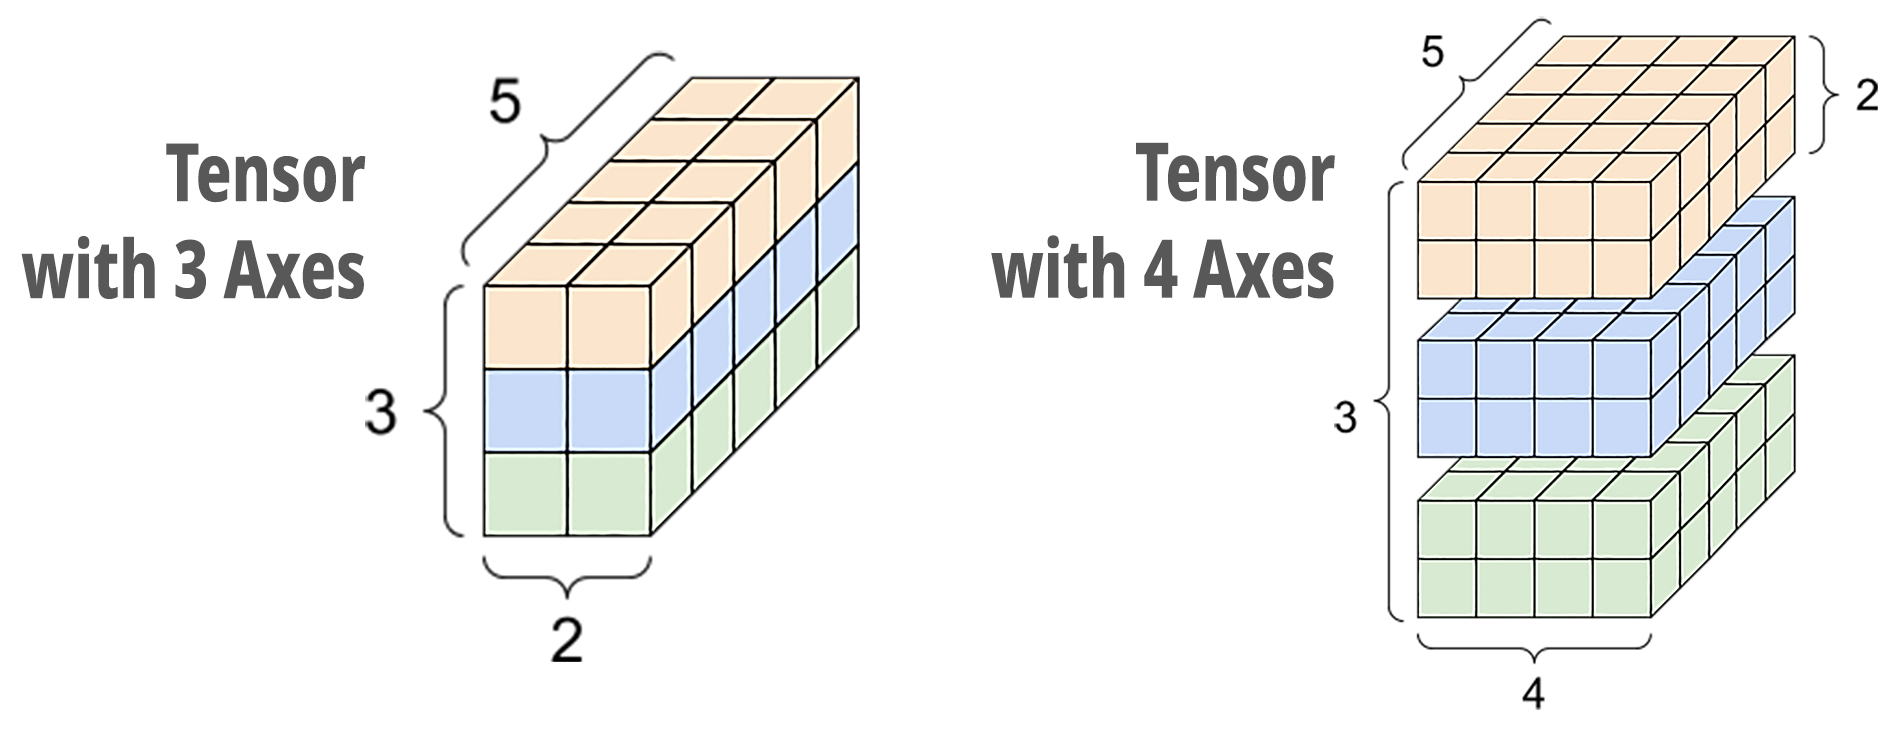 Tensor with 3 and 4 Axes